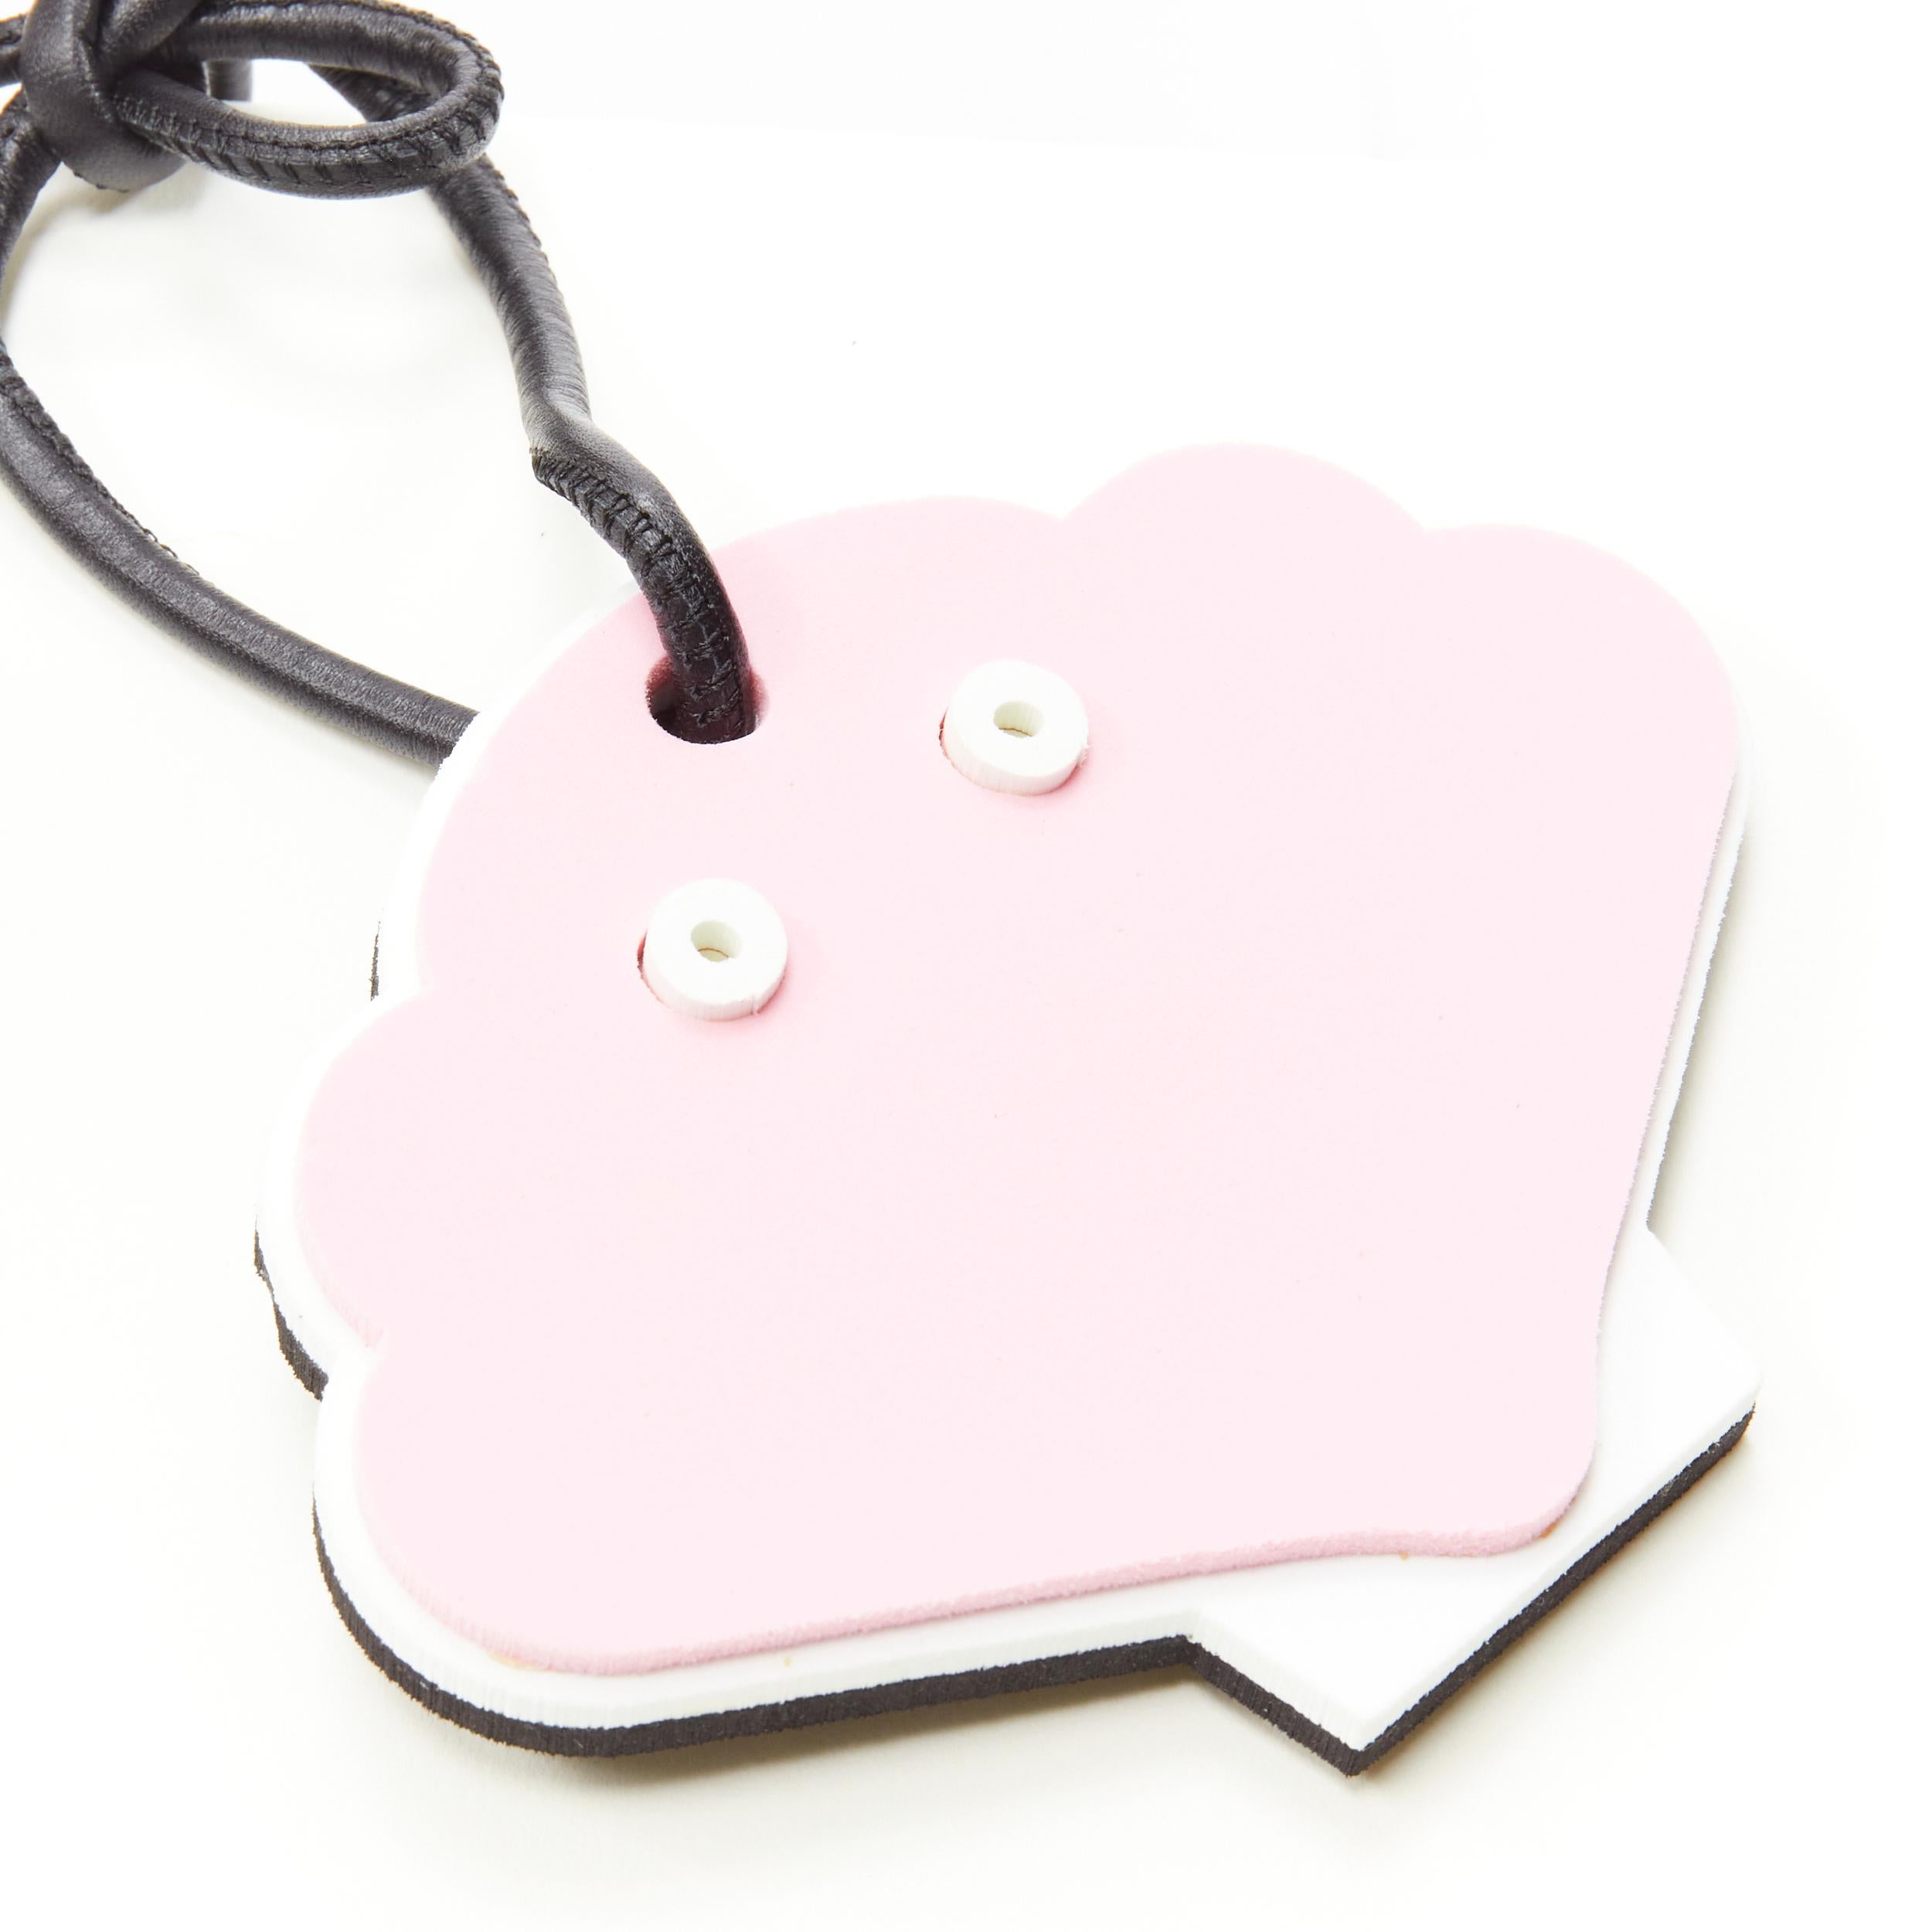 LOEWE pink clam foam black leather cord bag charm 
Reference: ANWU/A00105 
Brand: Loewe 
Designer: JW Anderson 
Material: Foam 
Color: Pink 
Pattern: Solid 
Closure: Tie 
Extra Detail: Styrofoam charm with leather cord self tie strap. Silver-tone